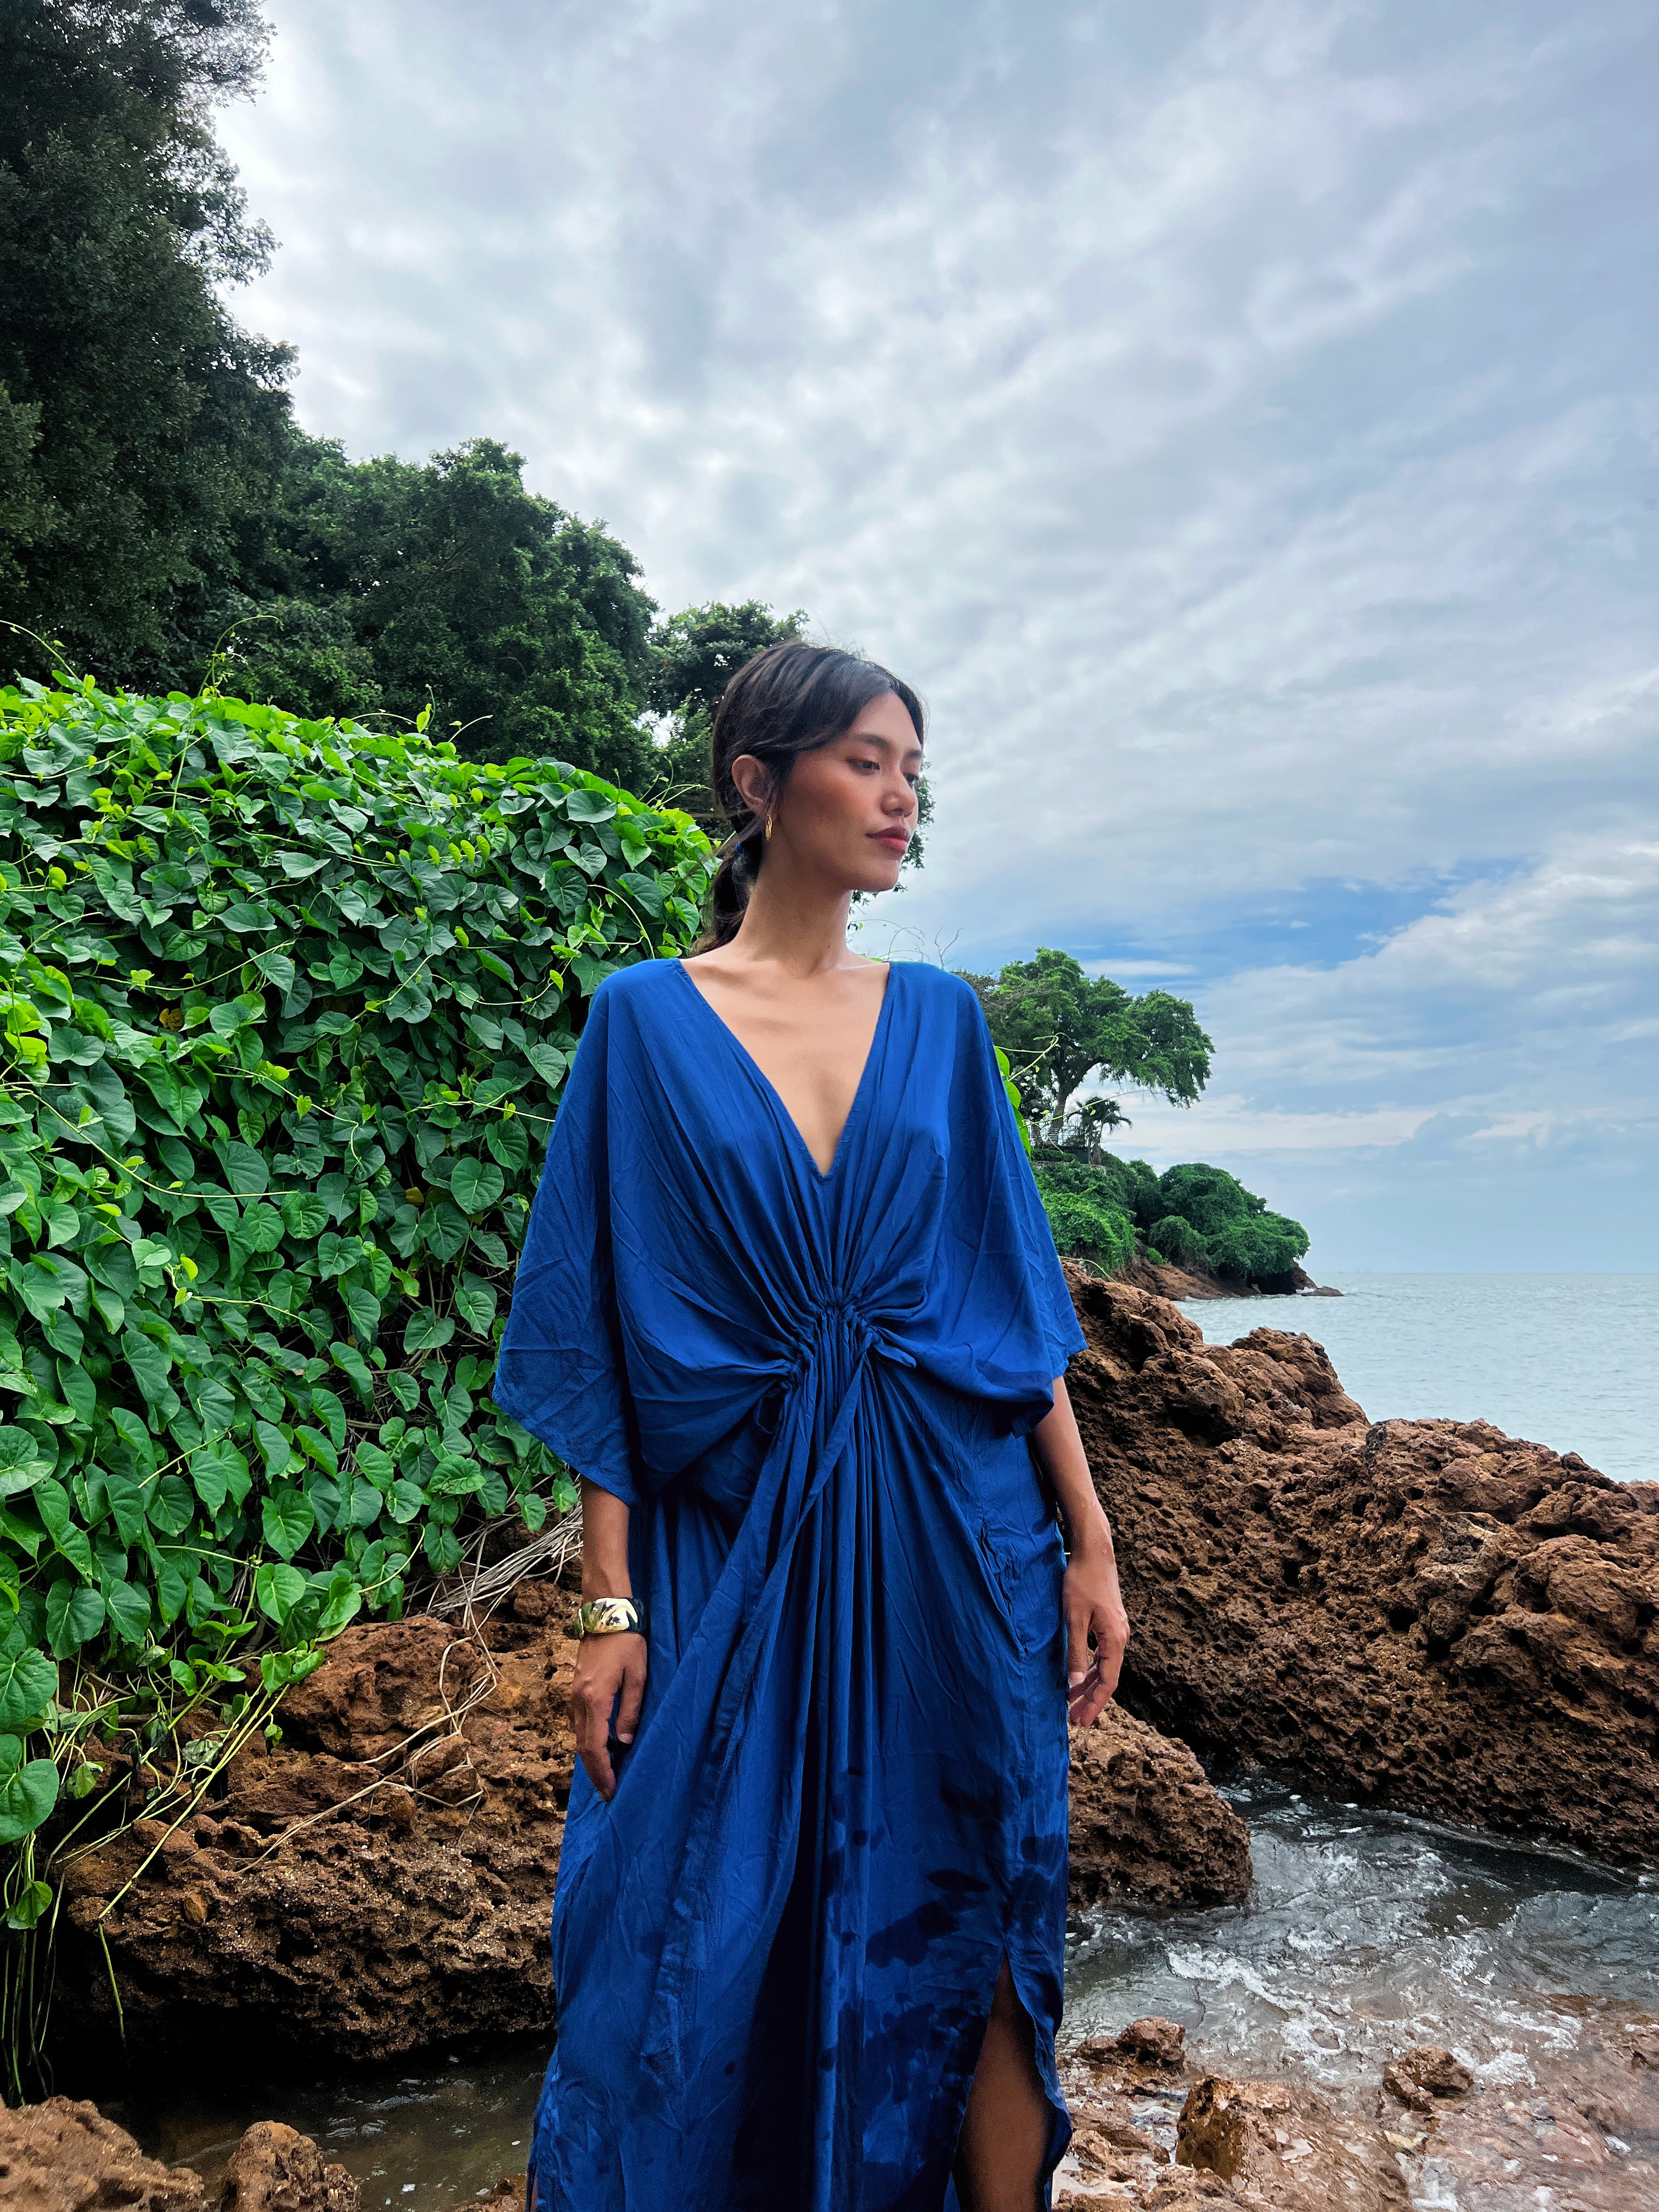 Discover the beauty of our Andaman Kaftan in Royal Blue, a versatile piece designed for your next escape. With inspiration from the vibrant ocean and sky, this oversized kaftan dress brings together elements of comfort, elegance, and timeless style. Whether worn as a maxi dress, beach cover-up, or wrap kimono, it effortlessly adds vacation vibes to any outfit.